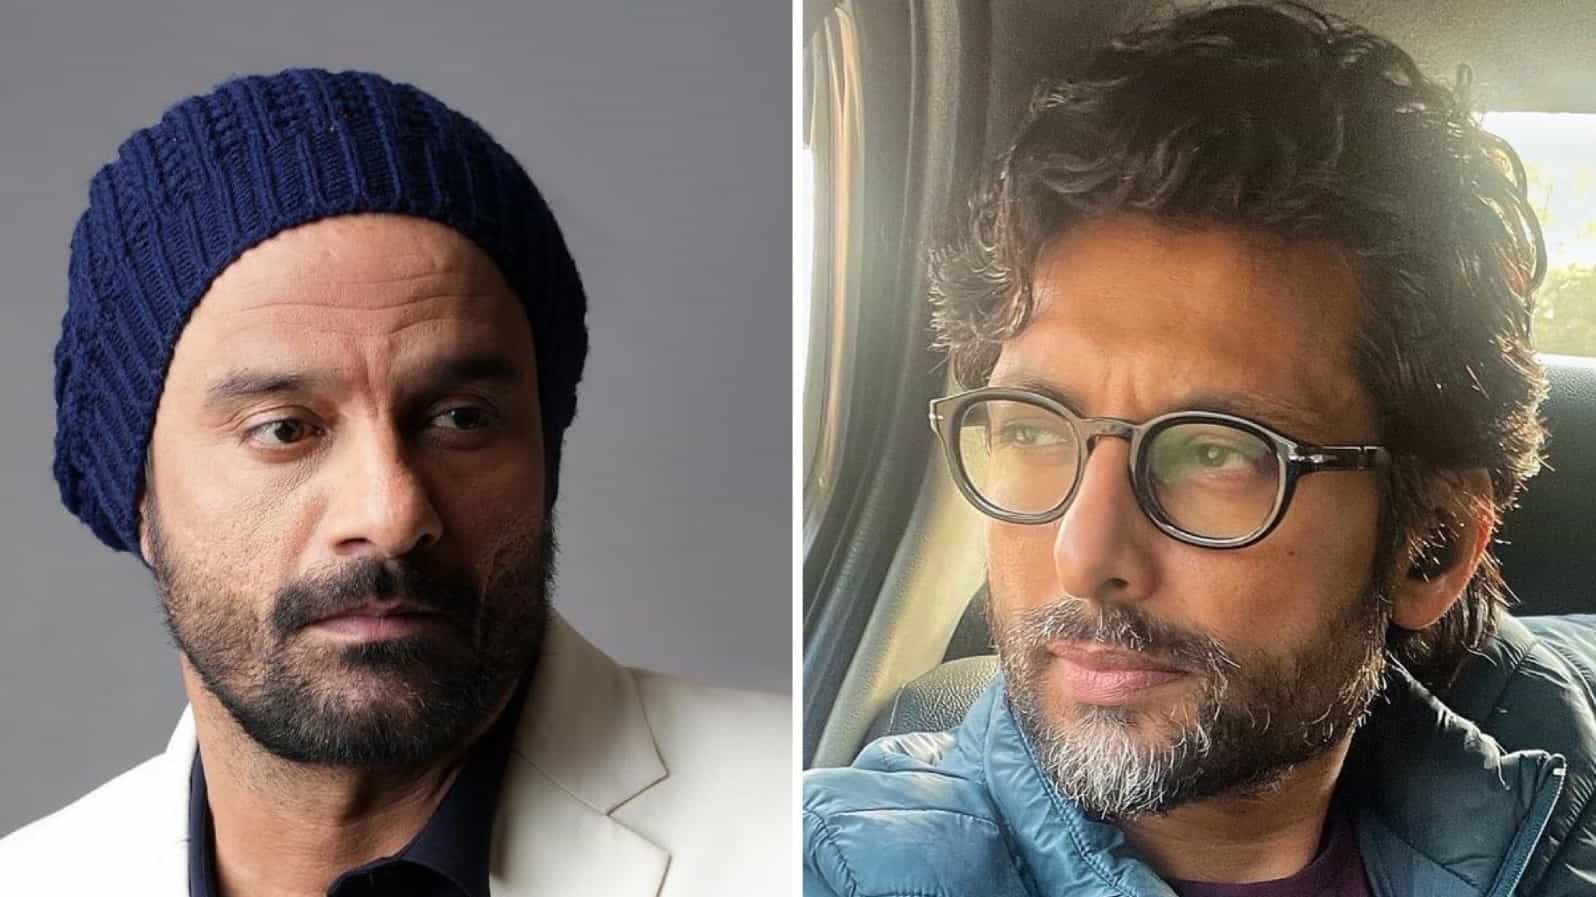 https://www.mobilemasala.com/movies/The-Broken-News-actor-Indraneil-Sengupta-on-Jaideep-Ahlawat-He-is-an-actor-from-a-different-planet-i267391